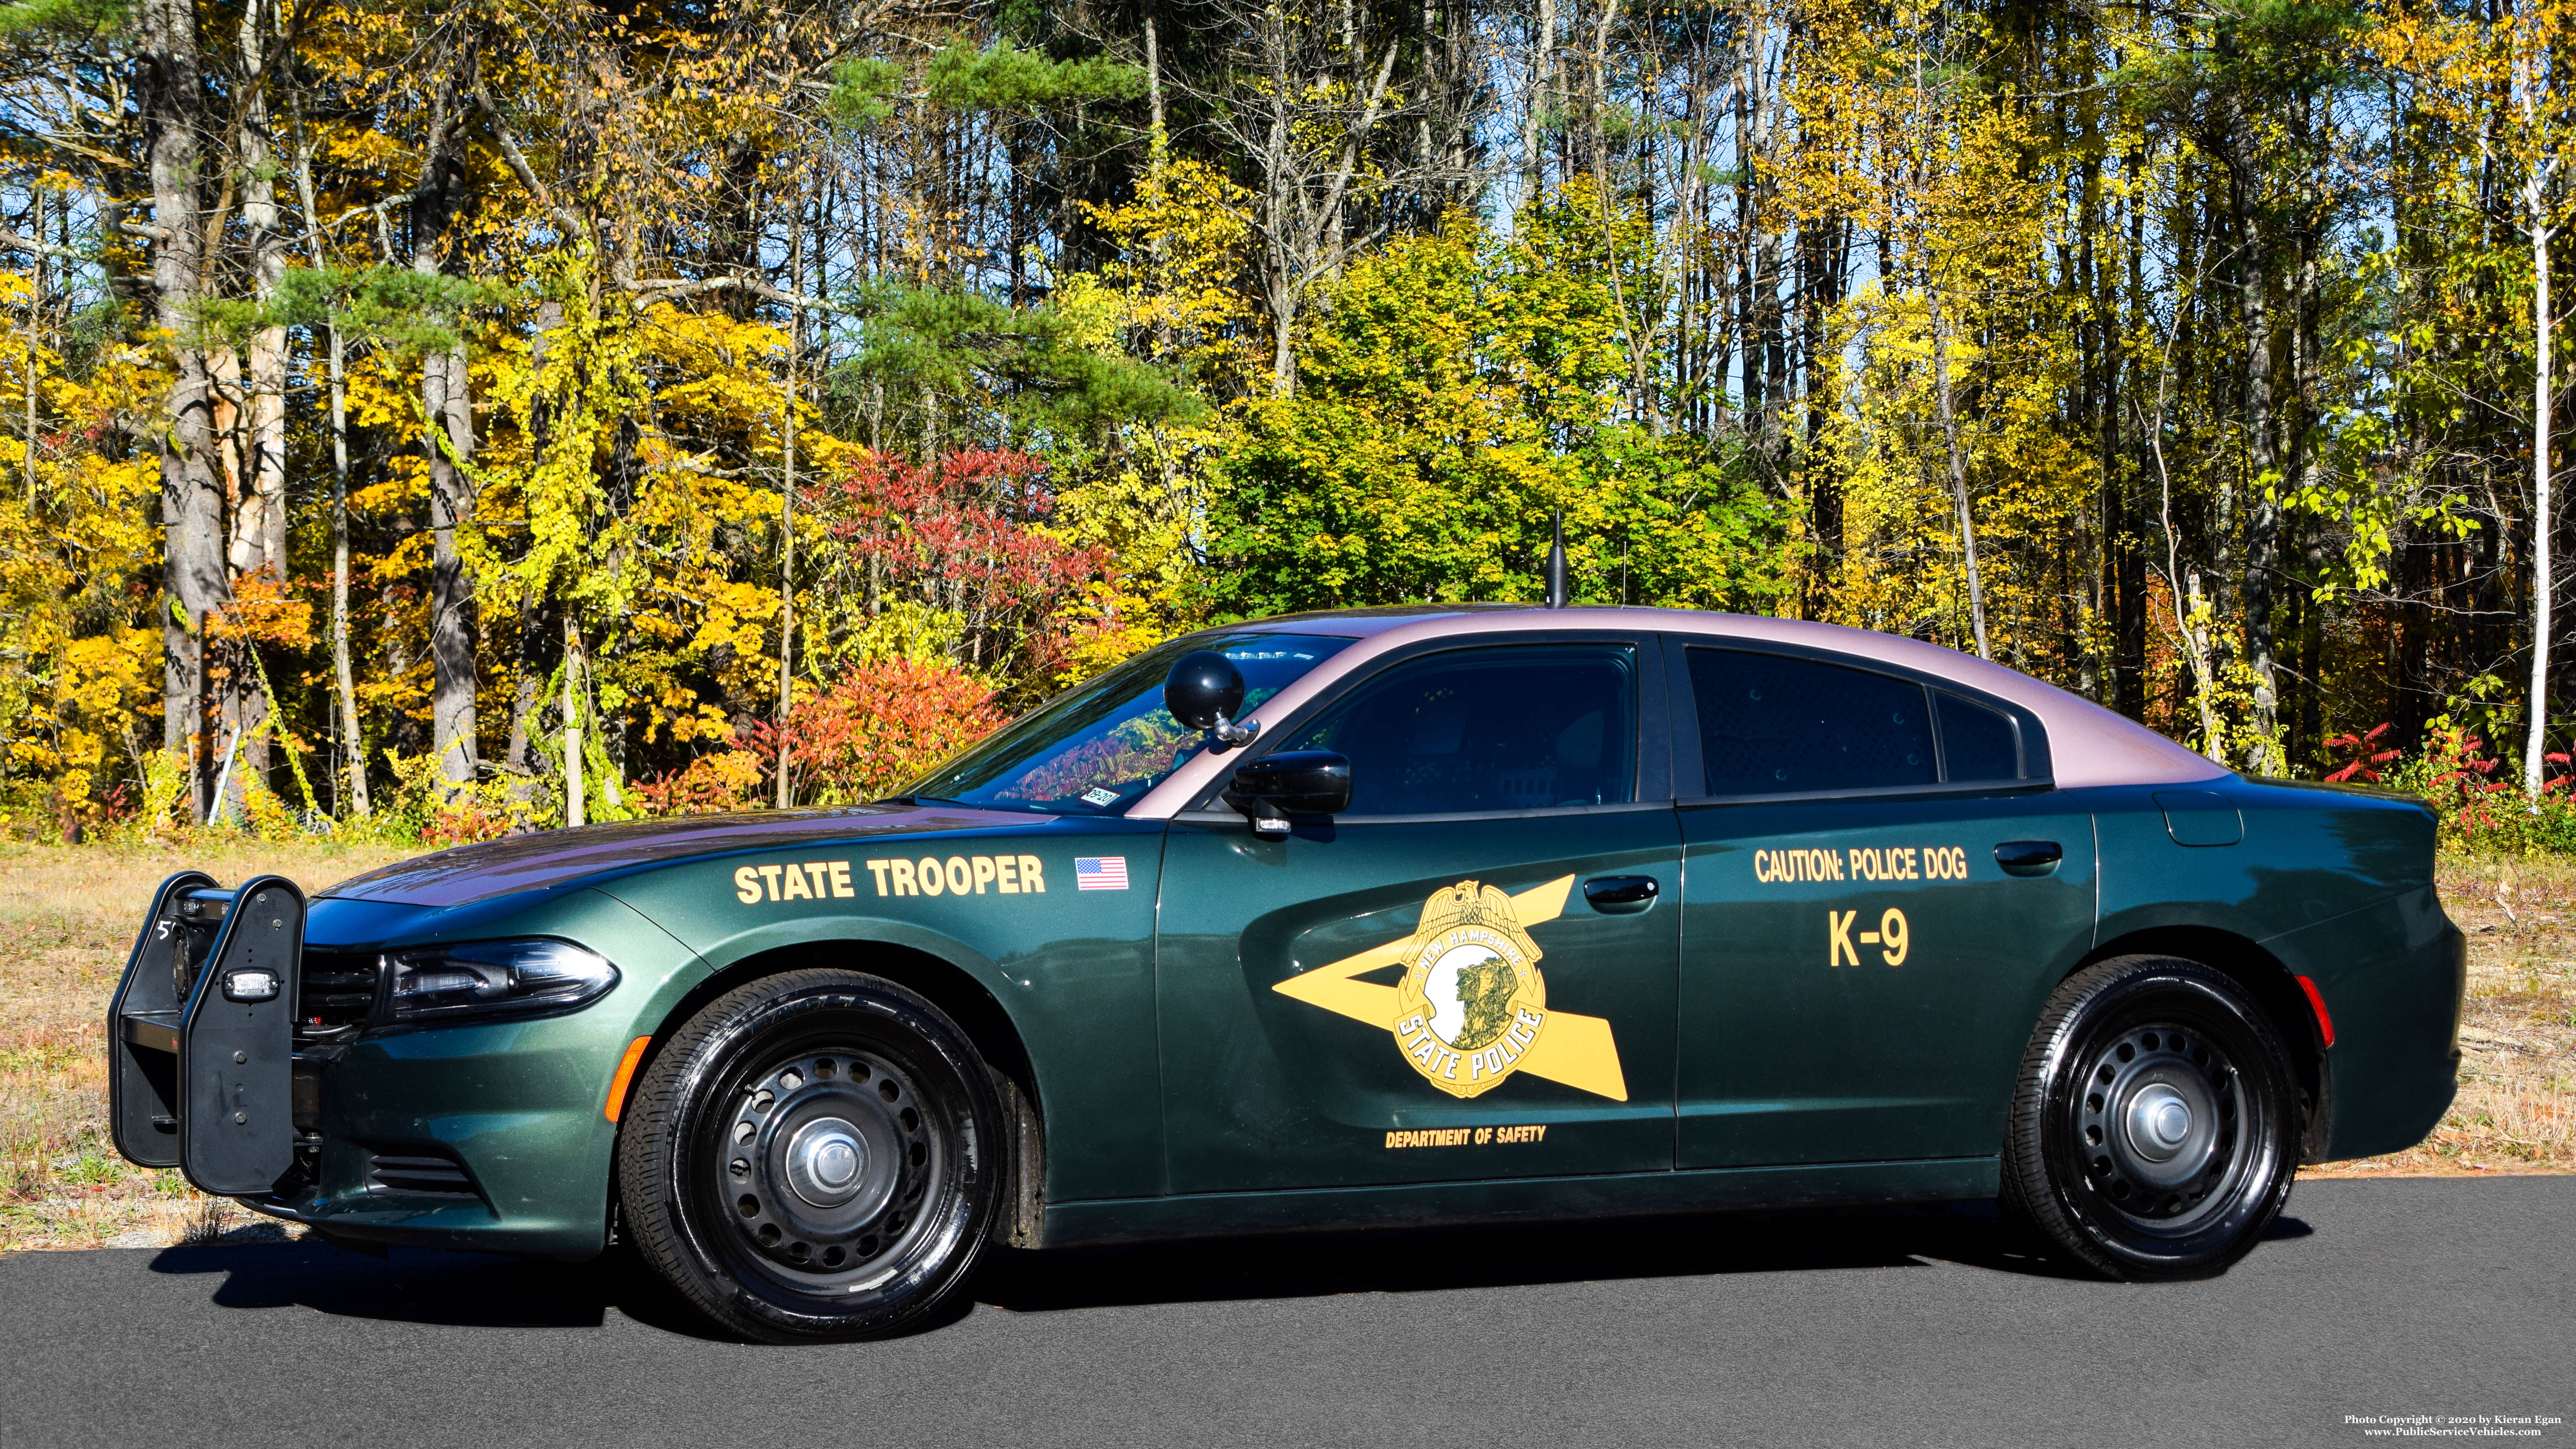 A photo  of New Hampshire State Police
            Cruiser 98, a 2019 Dodge Charger             taken by Kieran Egan